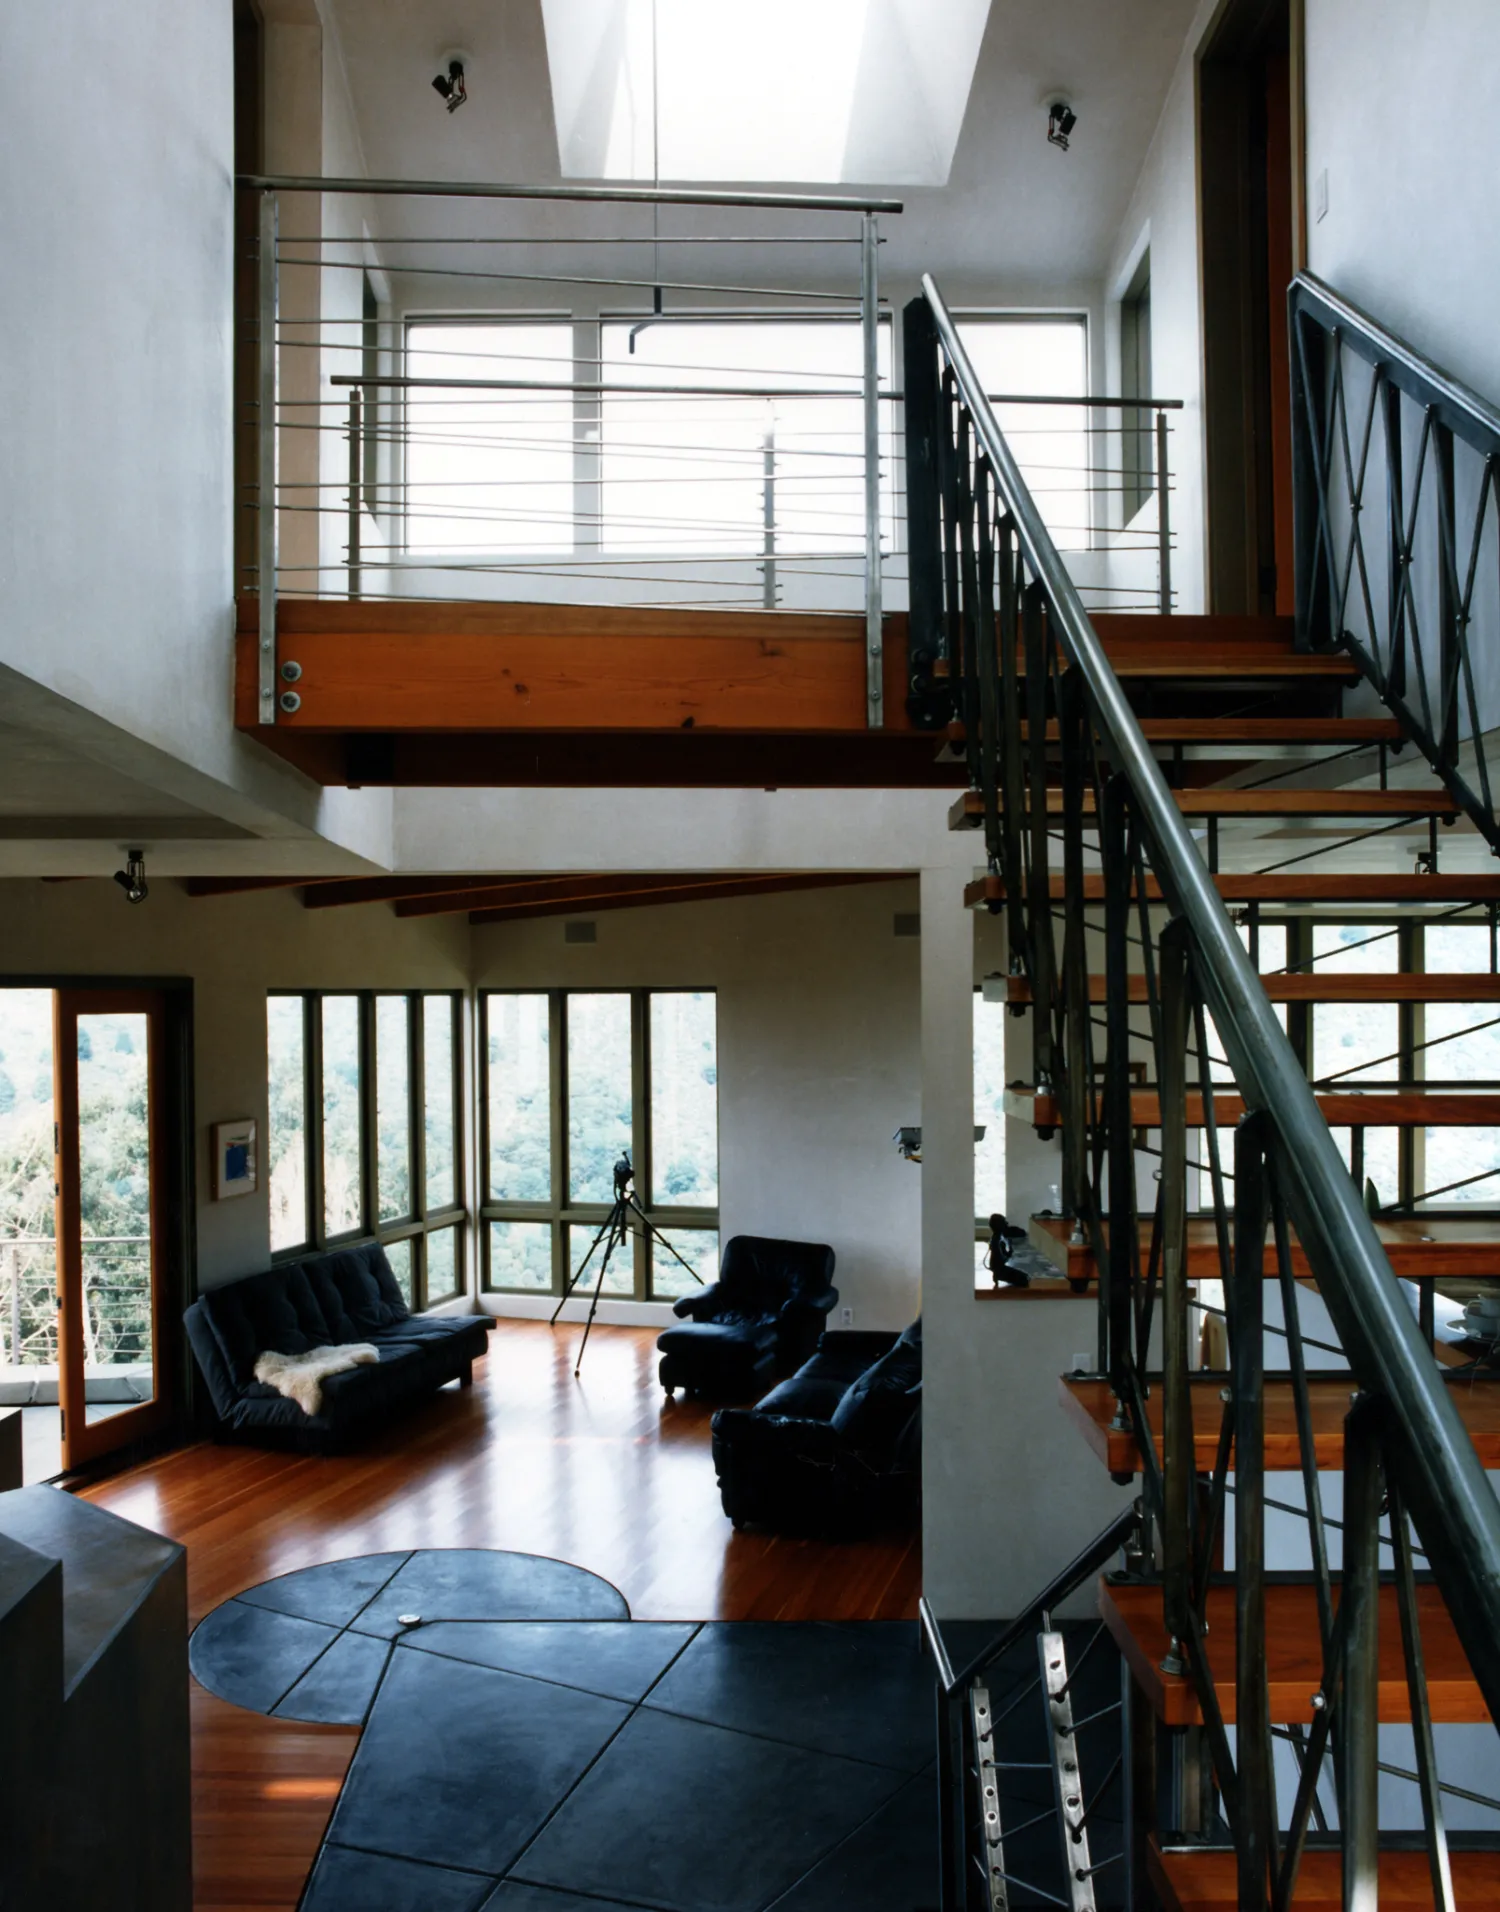 Interior view of the living room and custom stairs at Kayo House in Oakland, California.